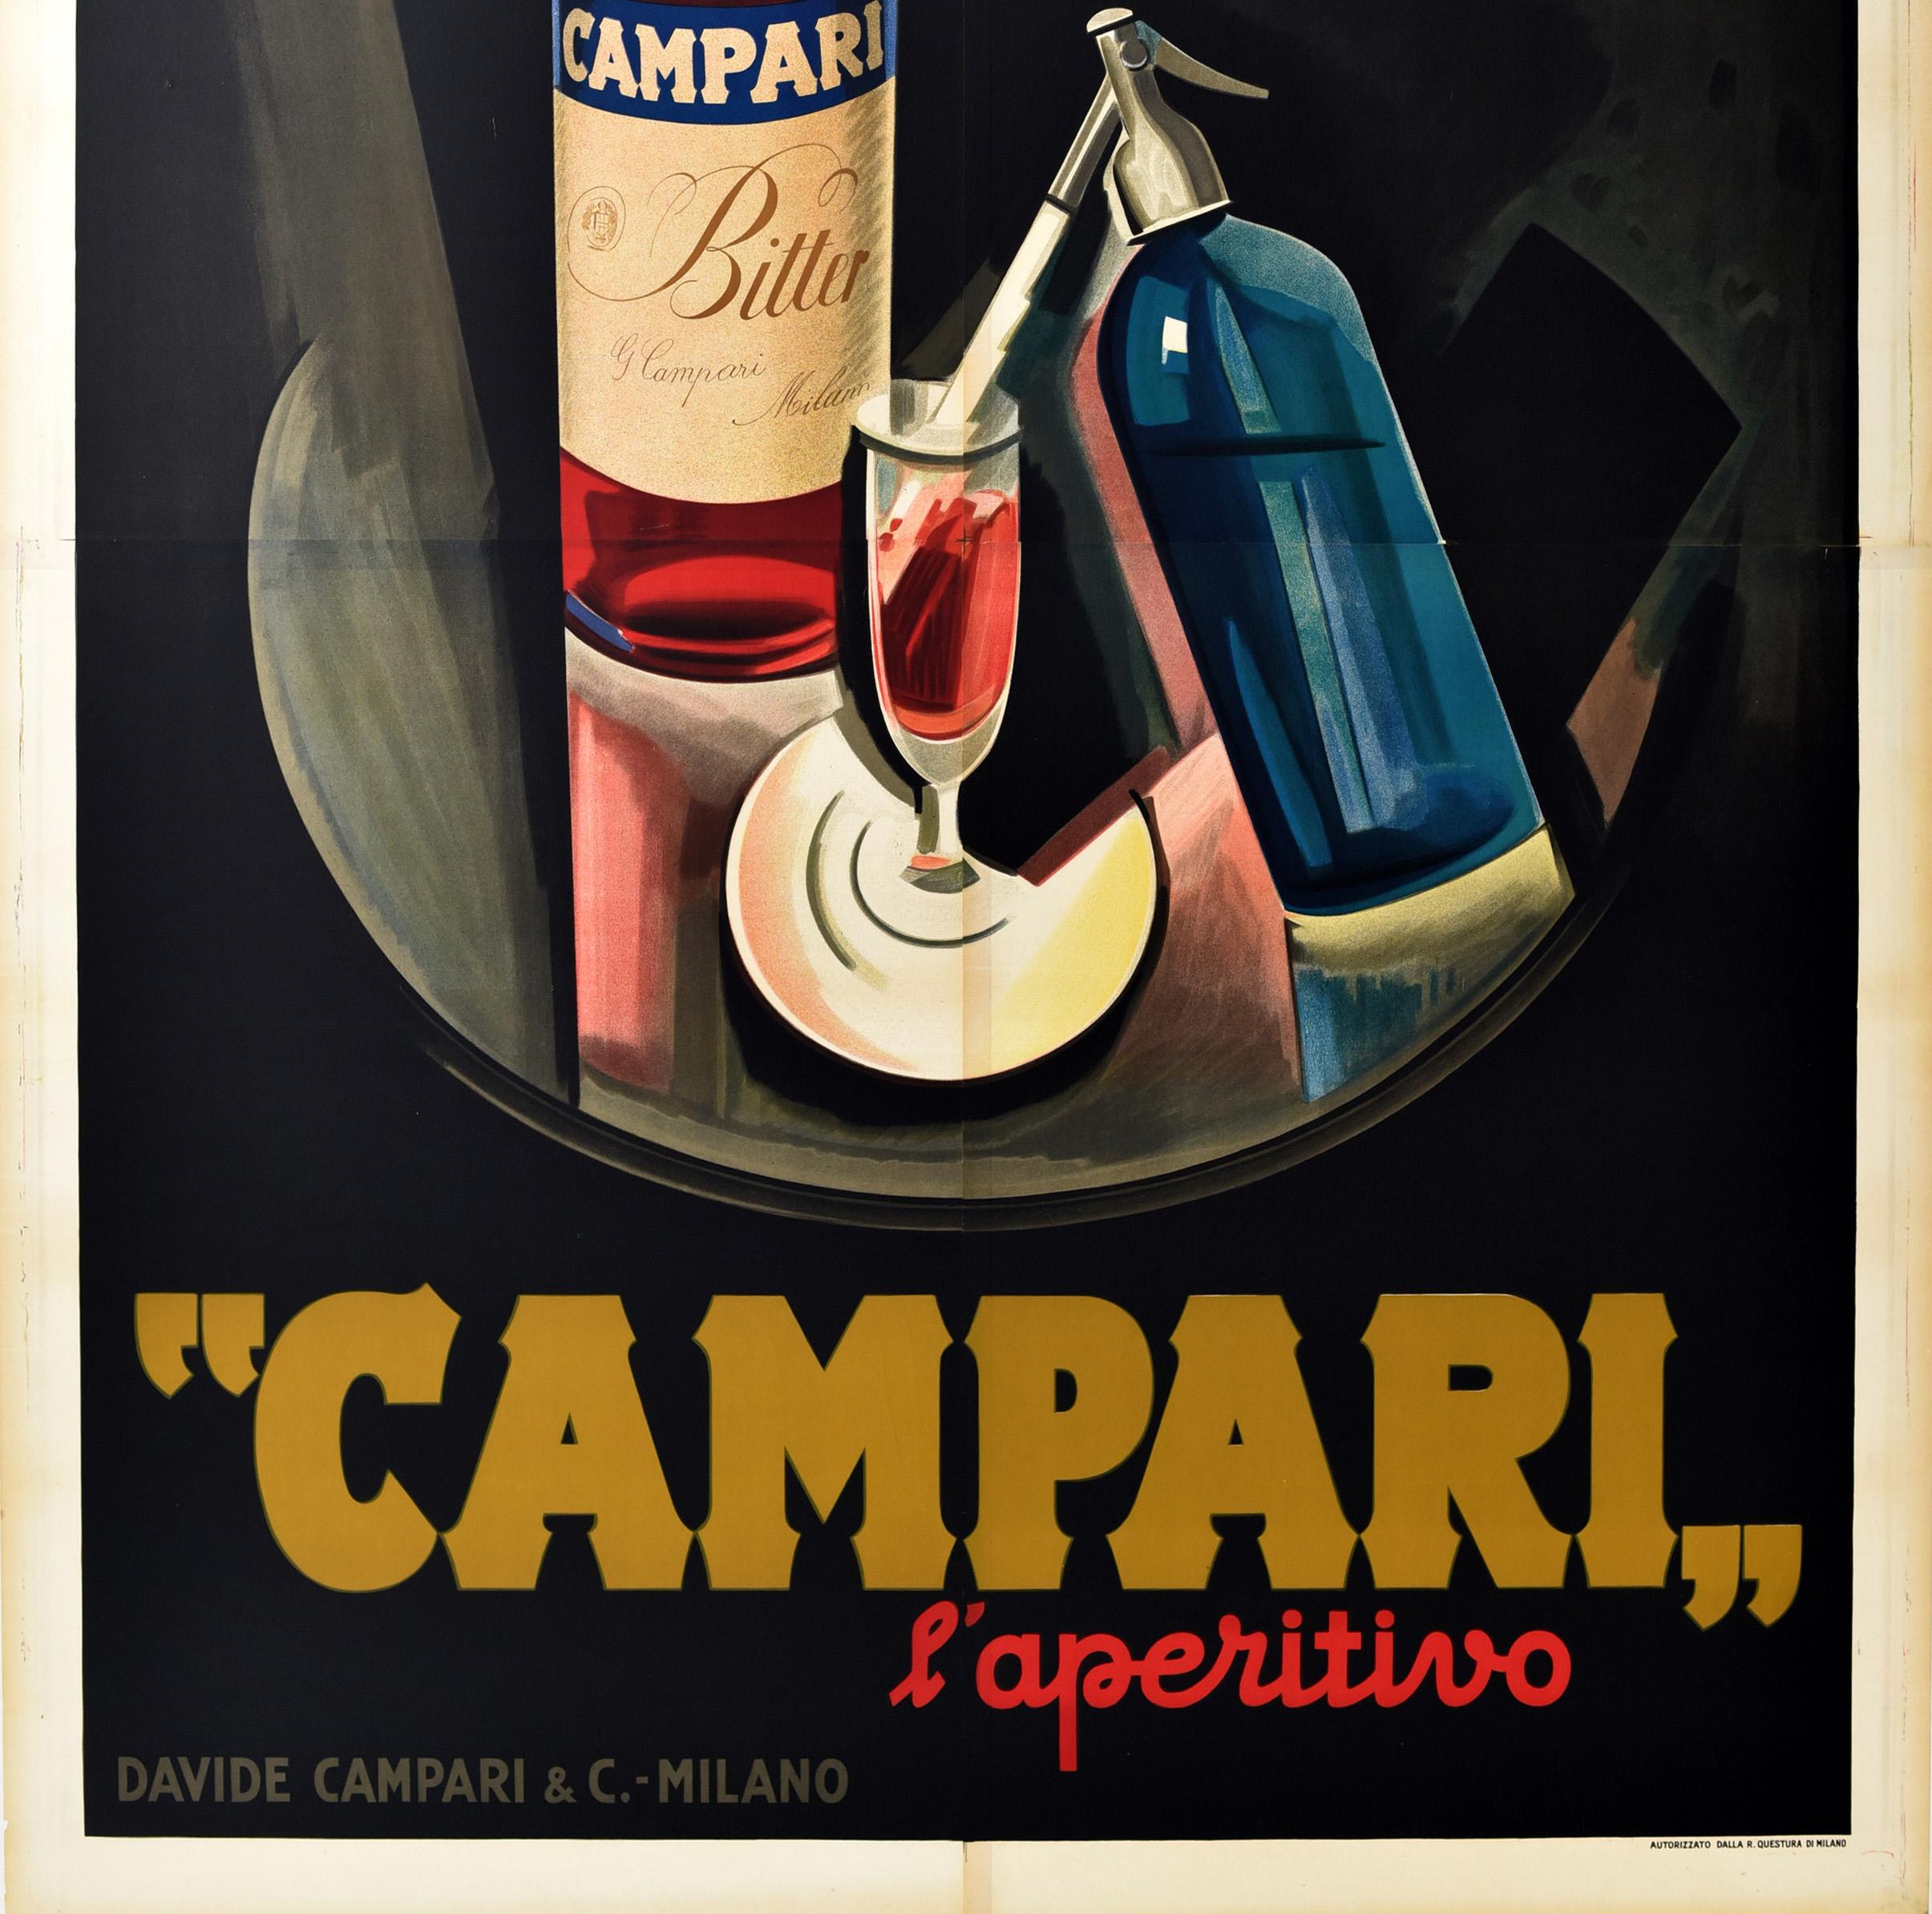 Rare and very large original vintage drink advertising poster for Campari, an alcoholic bitter aperitif drink made with herbs and fruit infused in alcohol and water. Stunning Art Deco style design by the Italian artist Marcello Nizzoli (1887-1969)